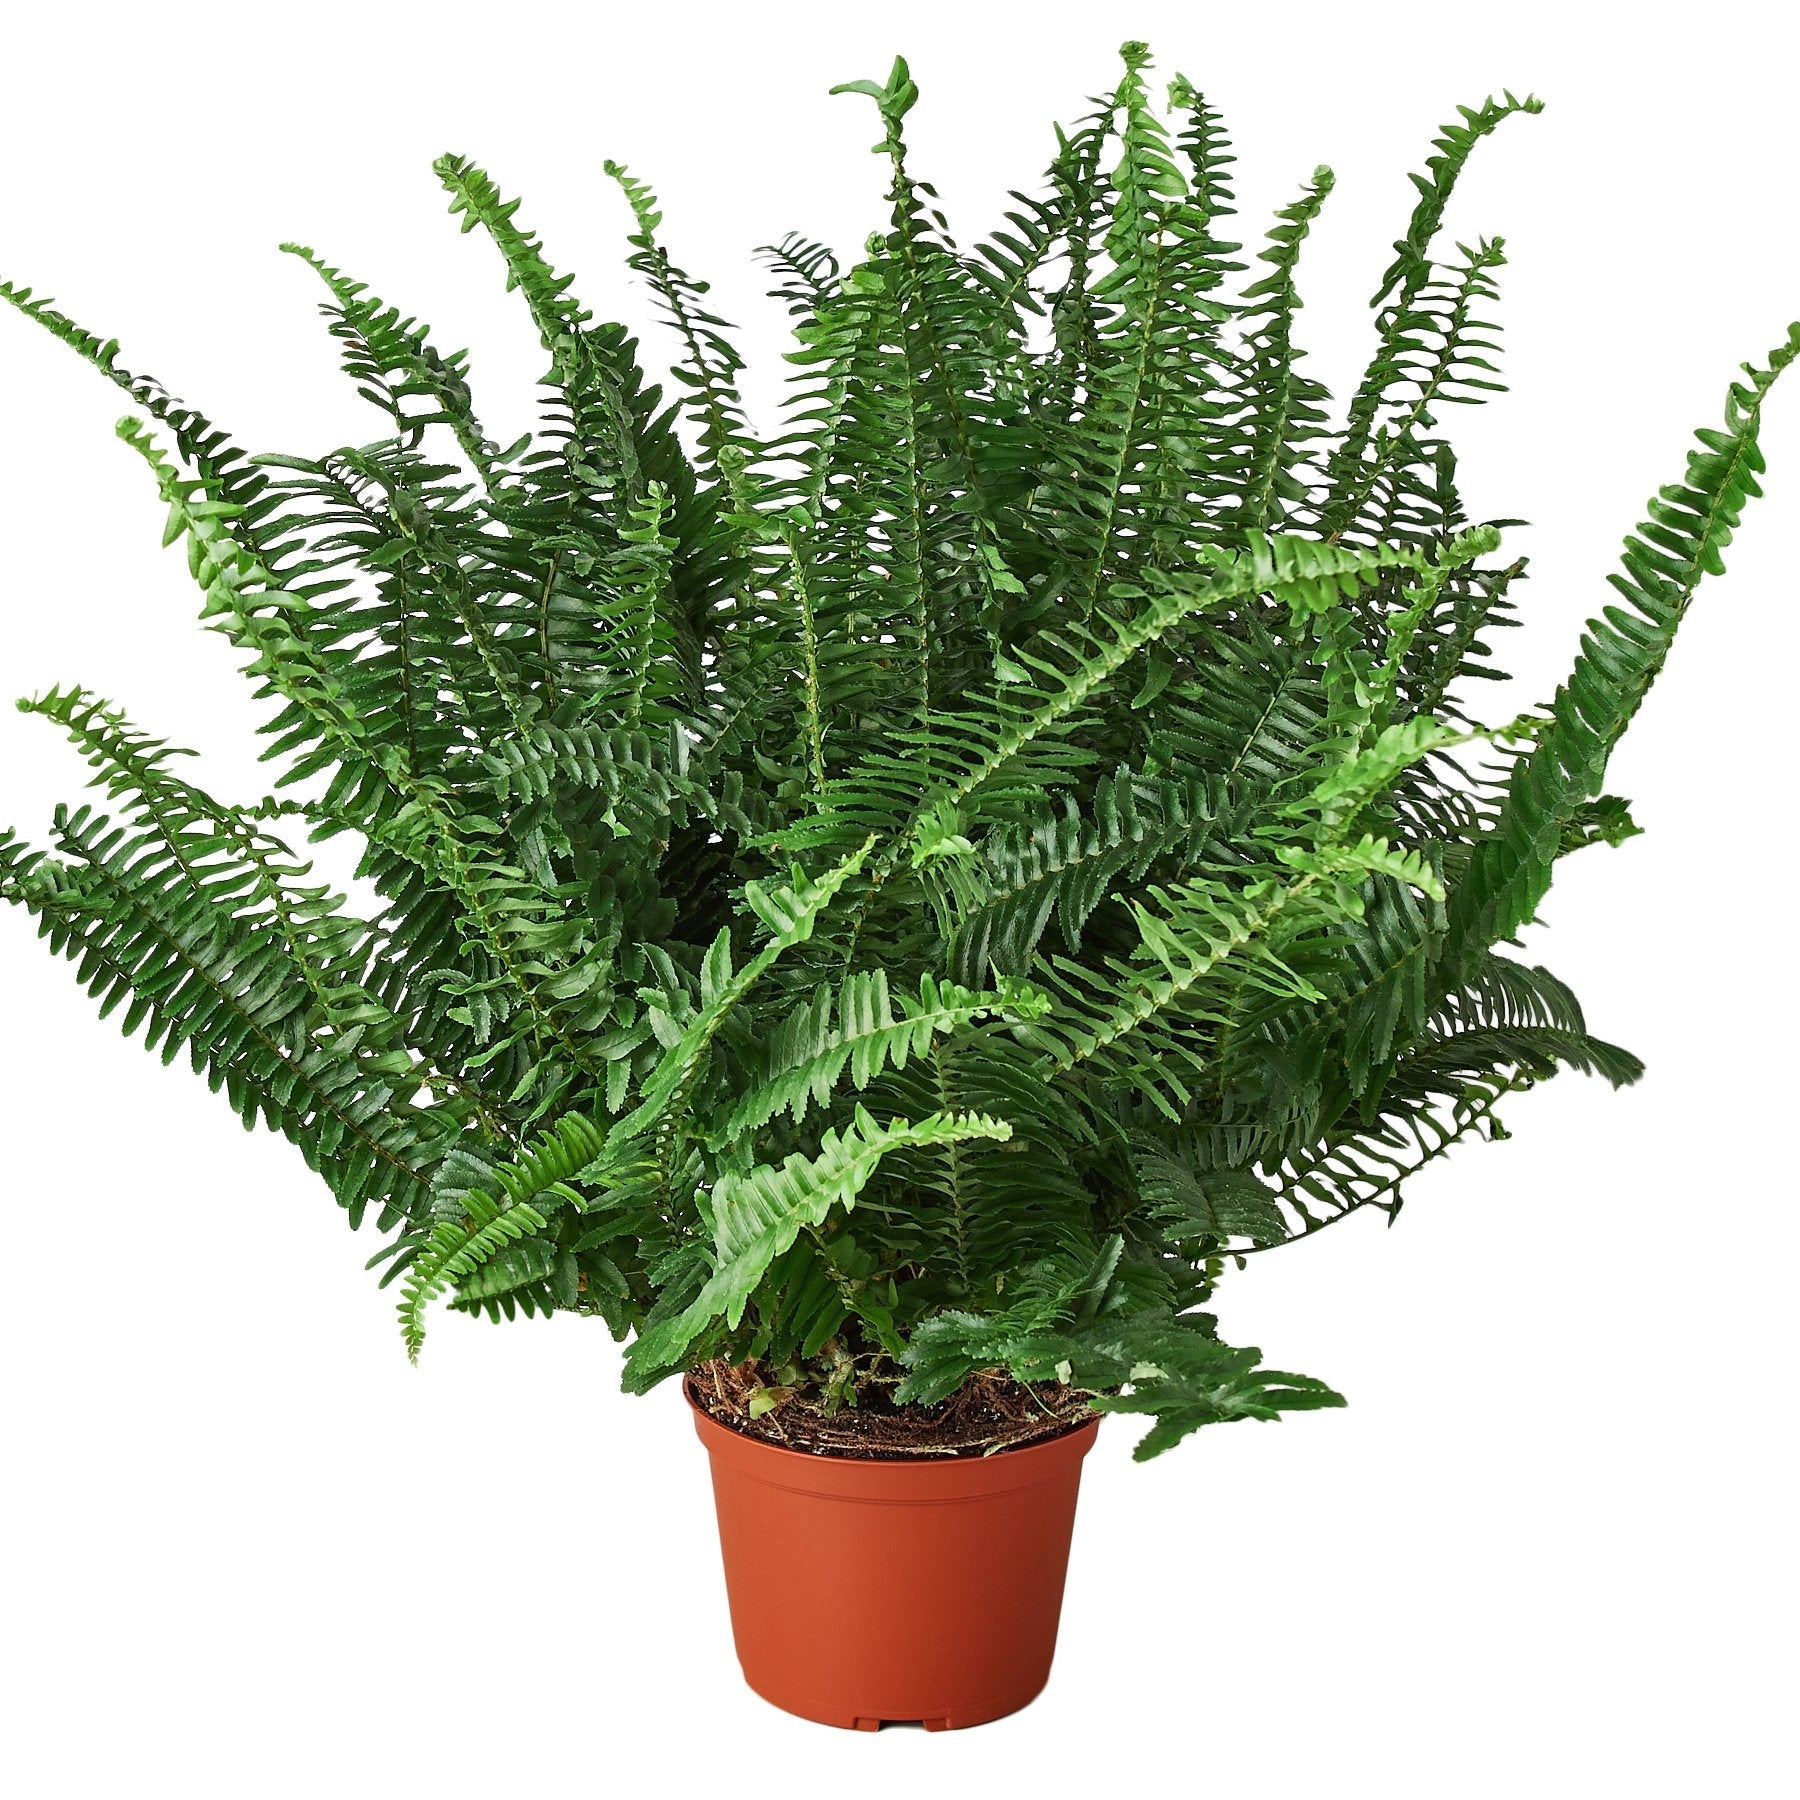 A fern plant in a pot on a white background, available at a top plant nursery near me.